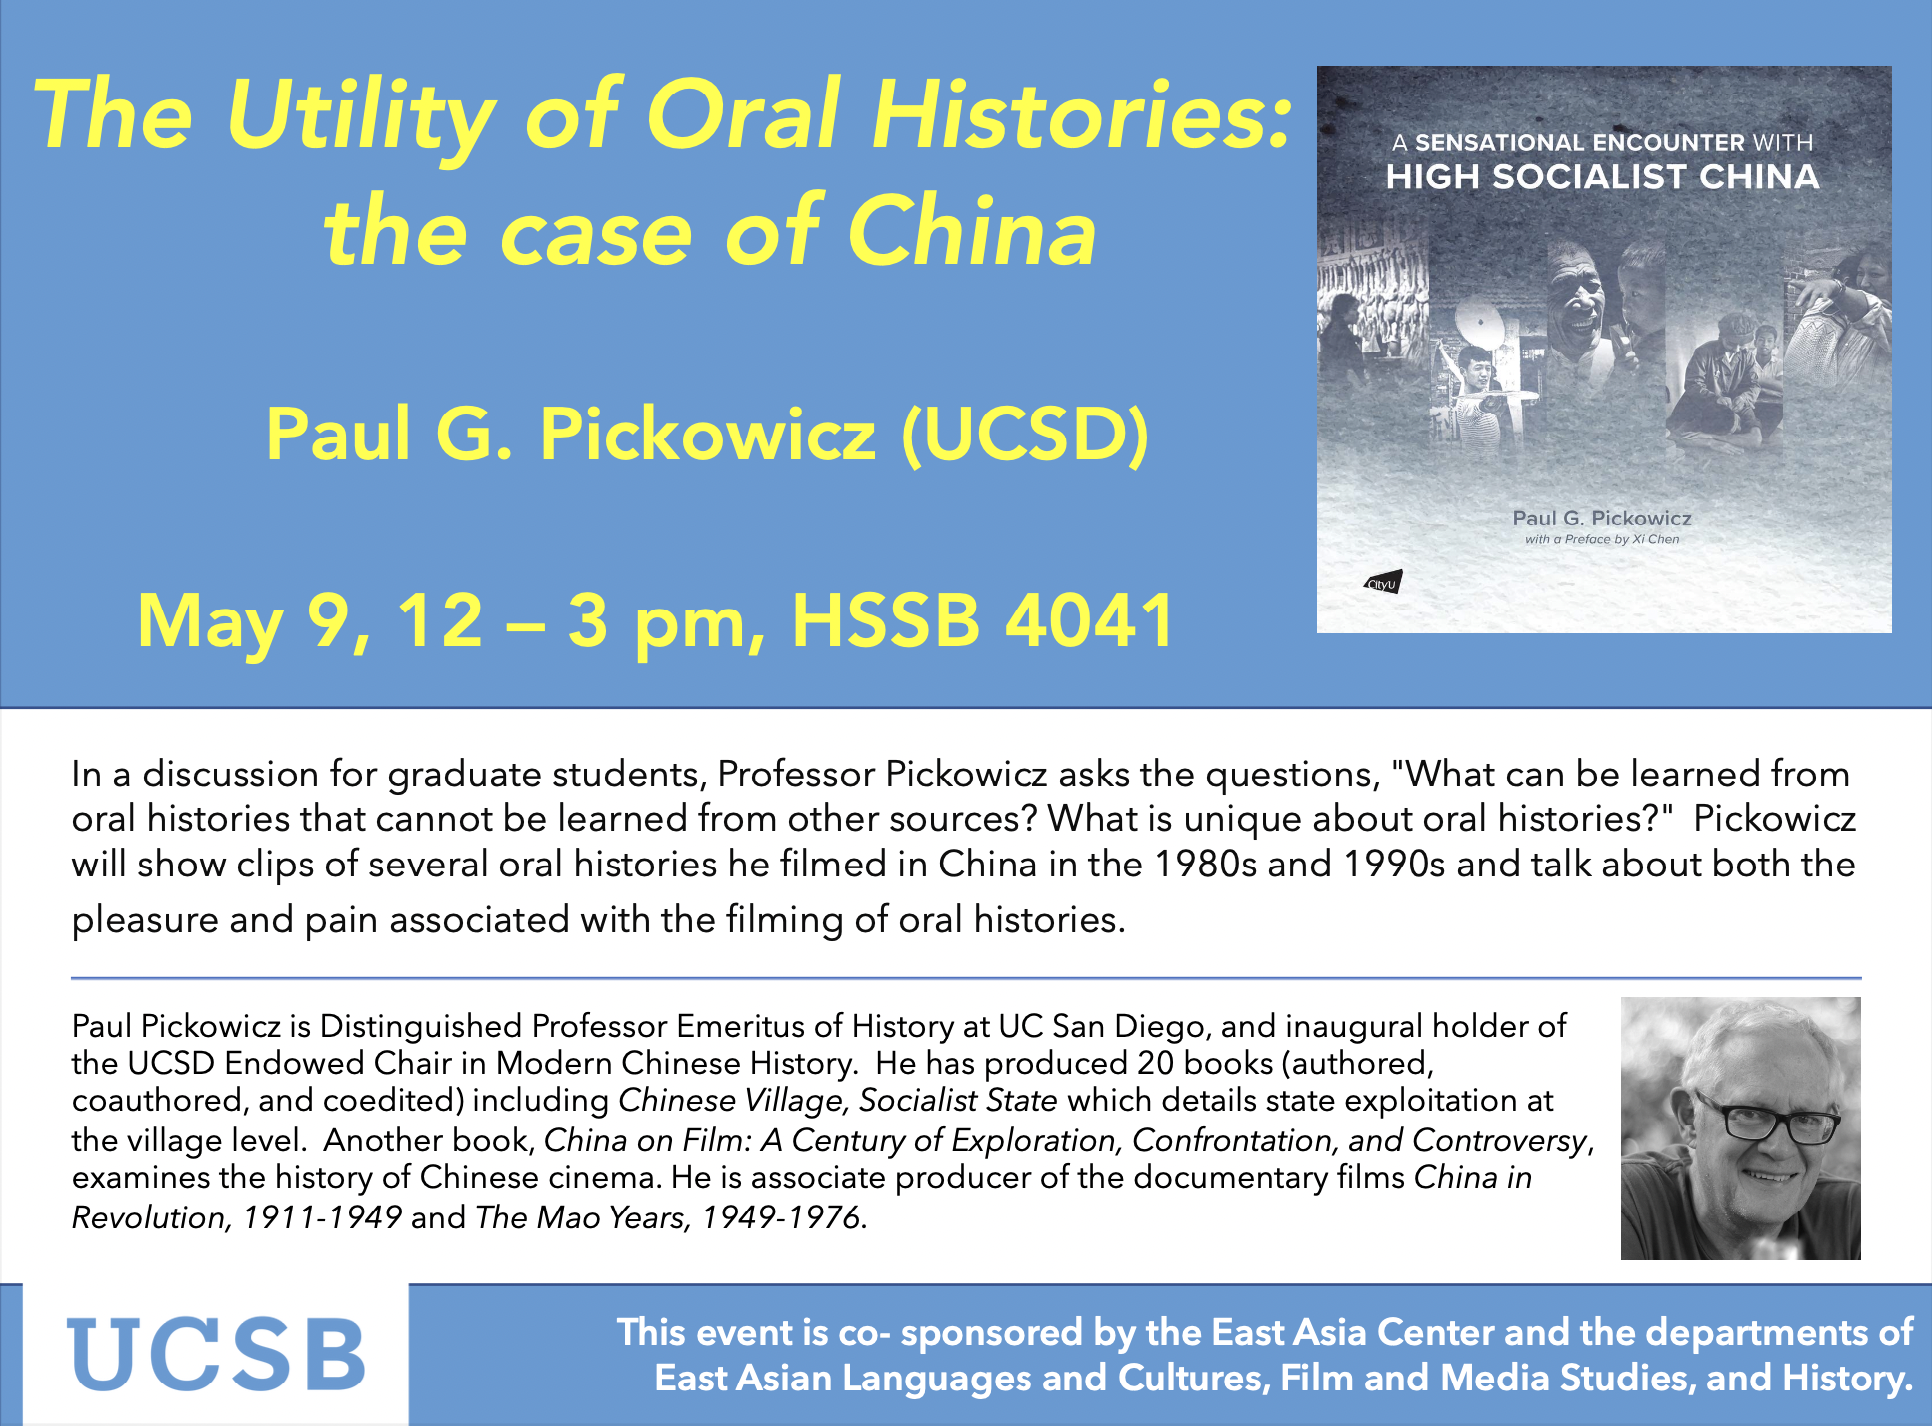 Flyer for "The Utility of Oral Histories: the Case of China" by Paul G. Pickowicz on May 9 from 12-3PM in HSSB 4041